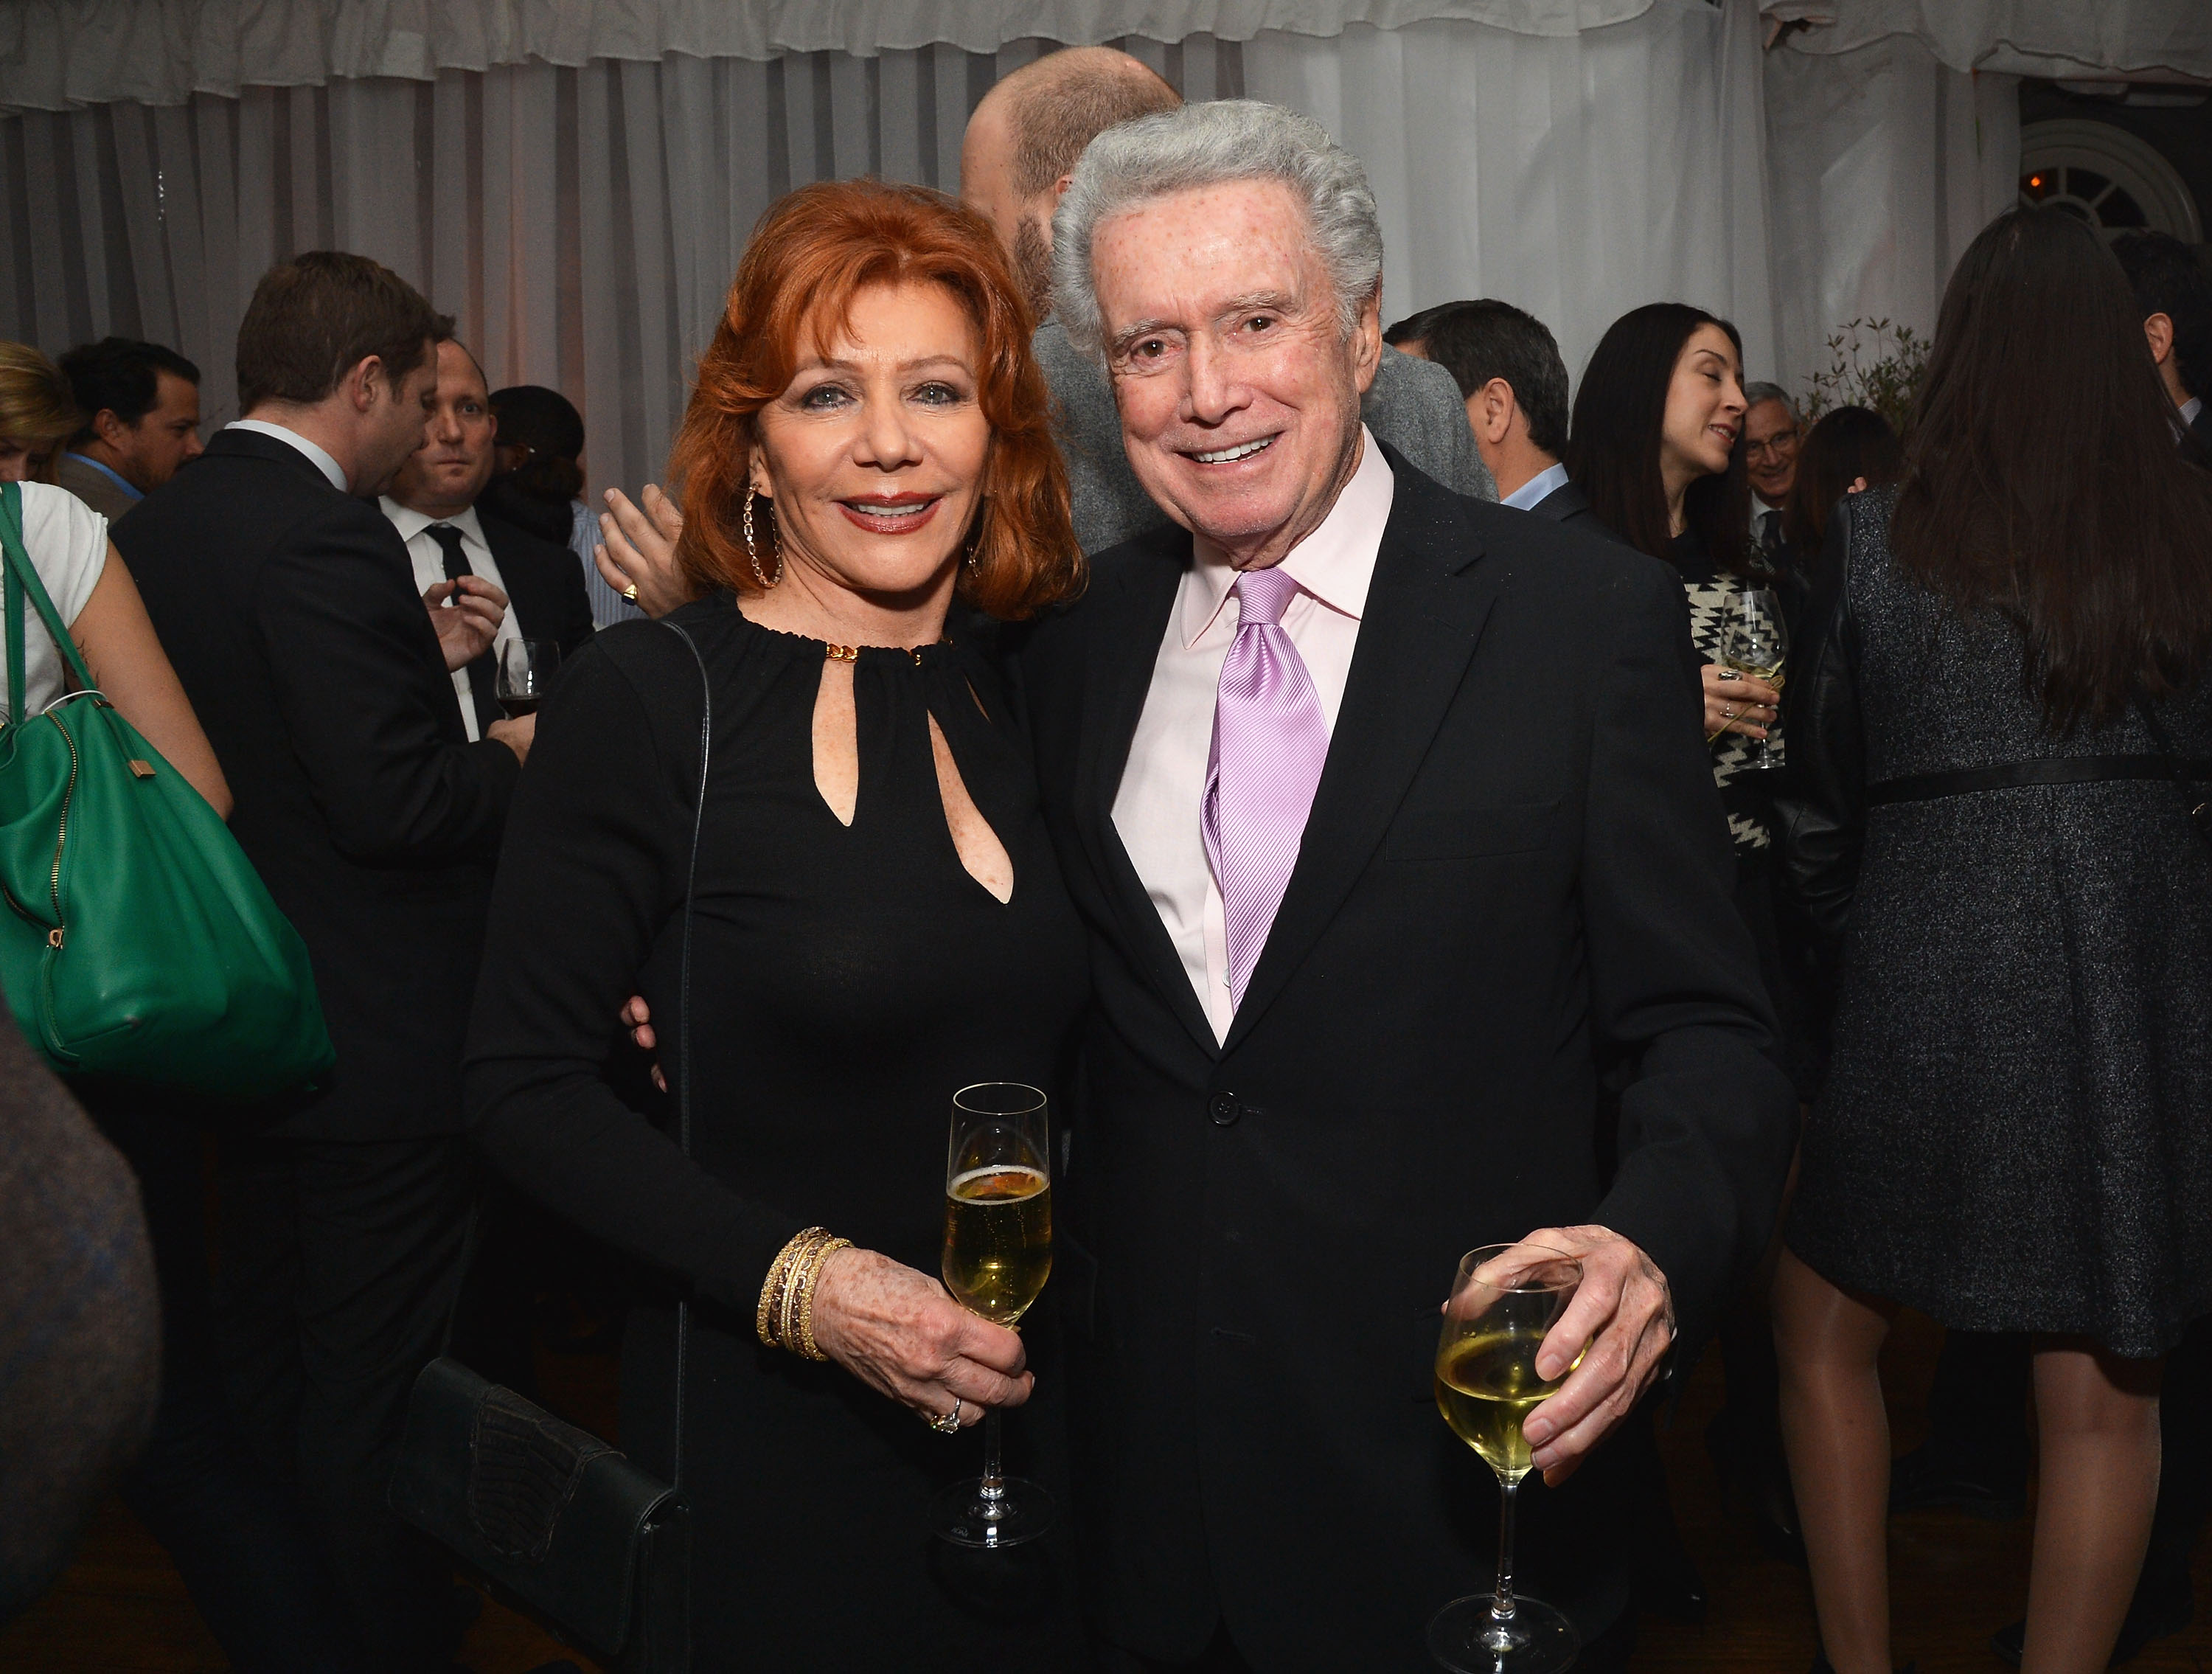 TV personality Regis Philbin (R) and Joy Philbin - After Party For Premiere Of The Imitation Game, Hosted By Weinstein Company